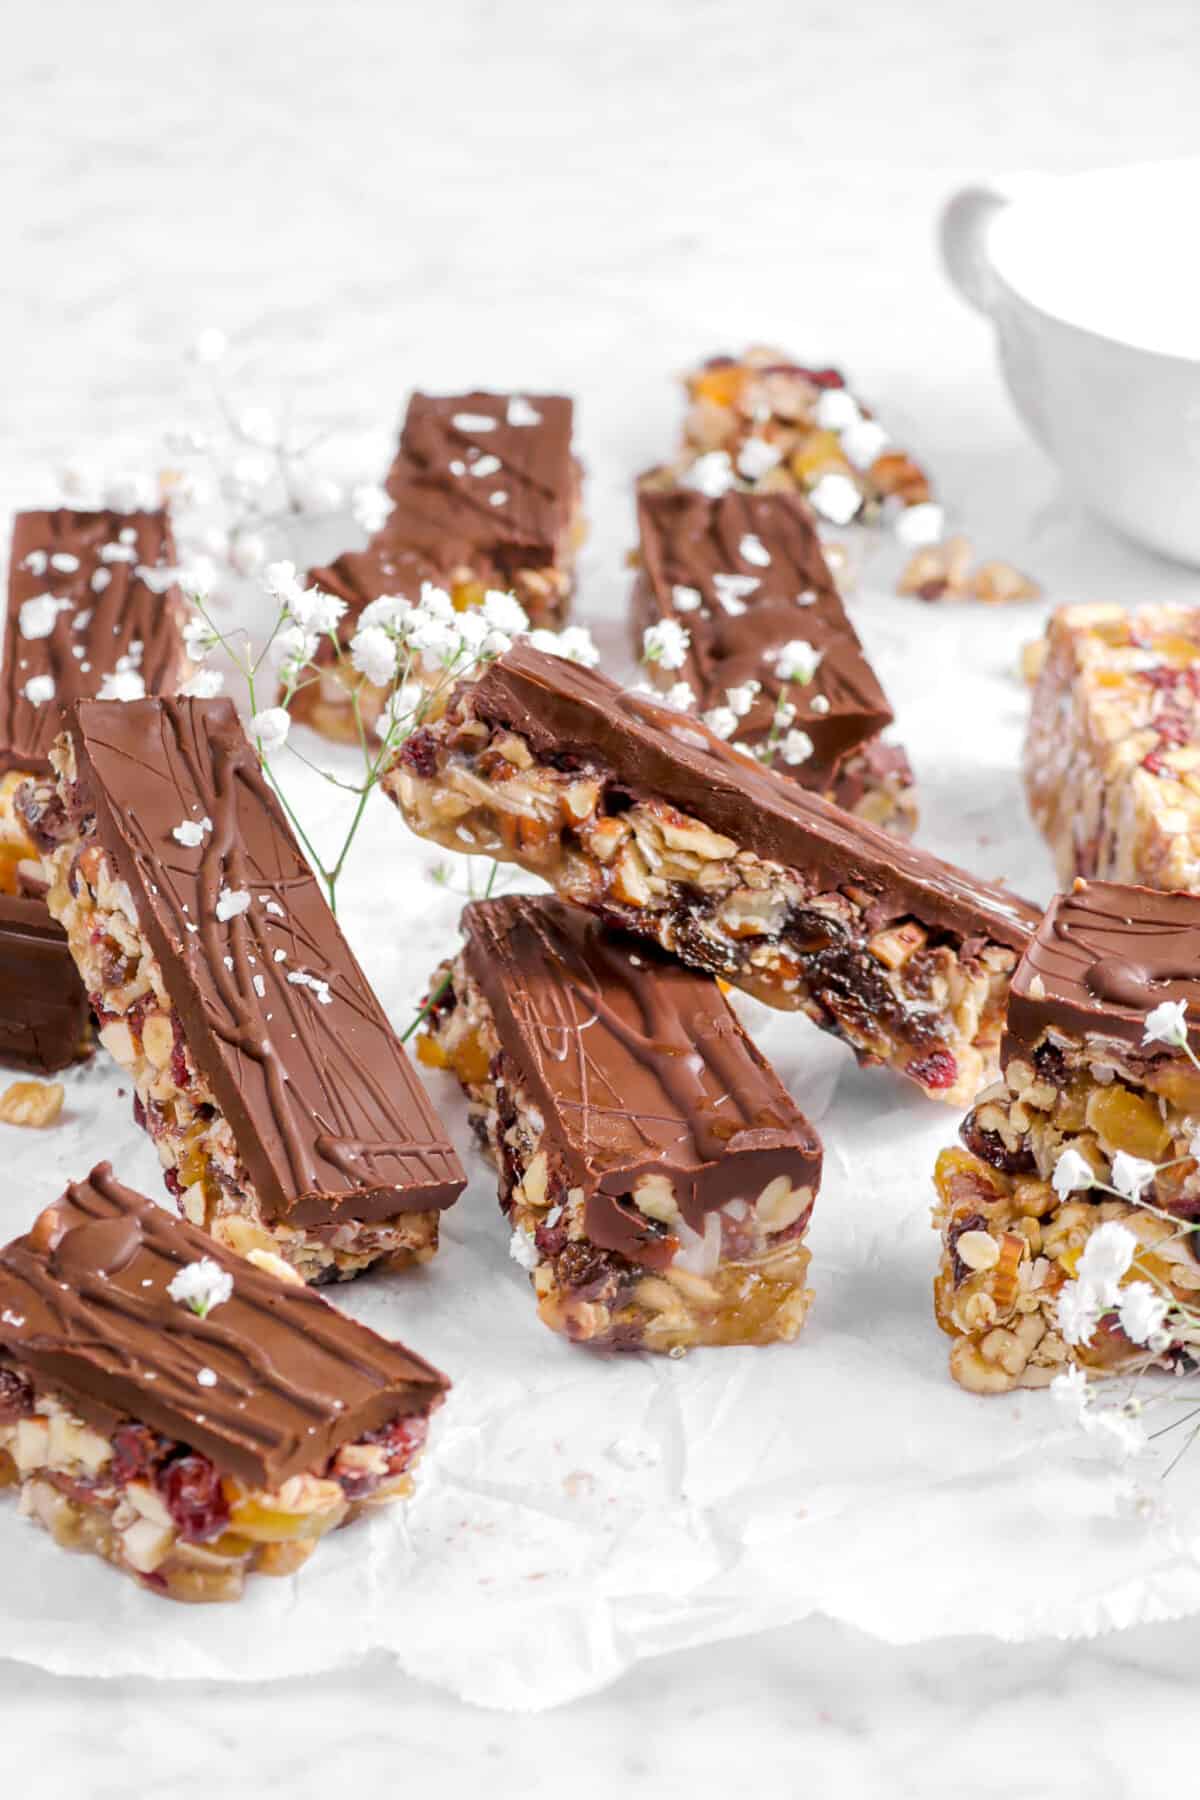 nine granola bars on parchment paper with flowes and a coffee mug